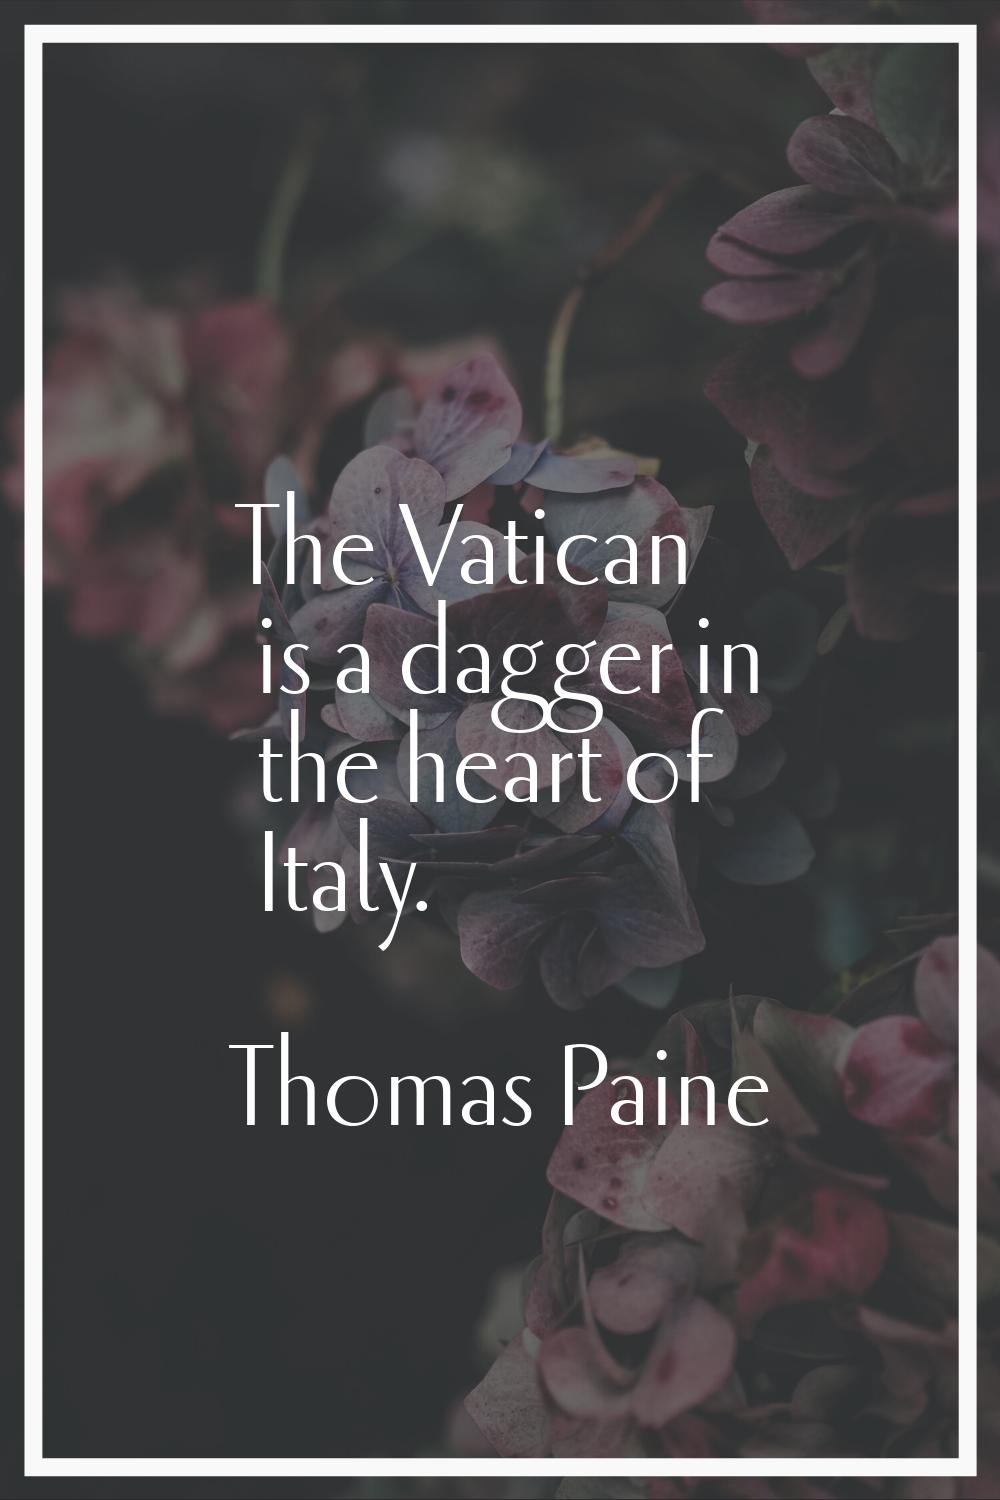 The Vatican is a dagger in the heart of Italy.